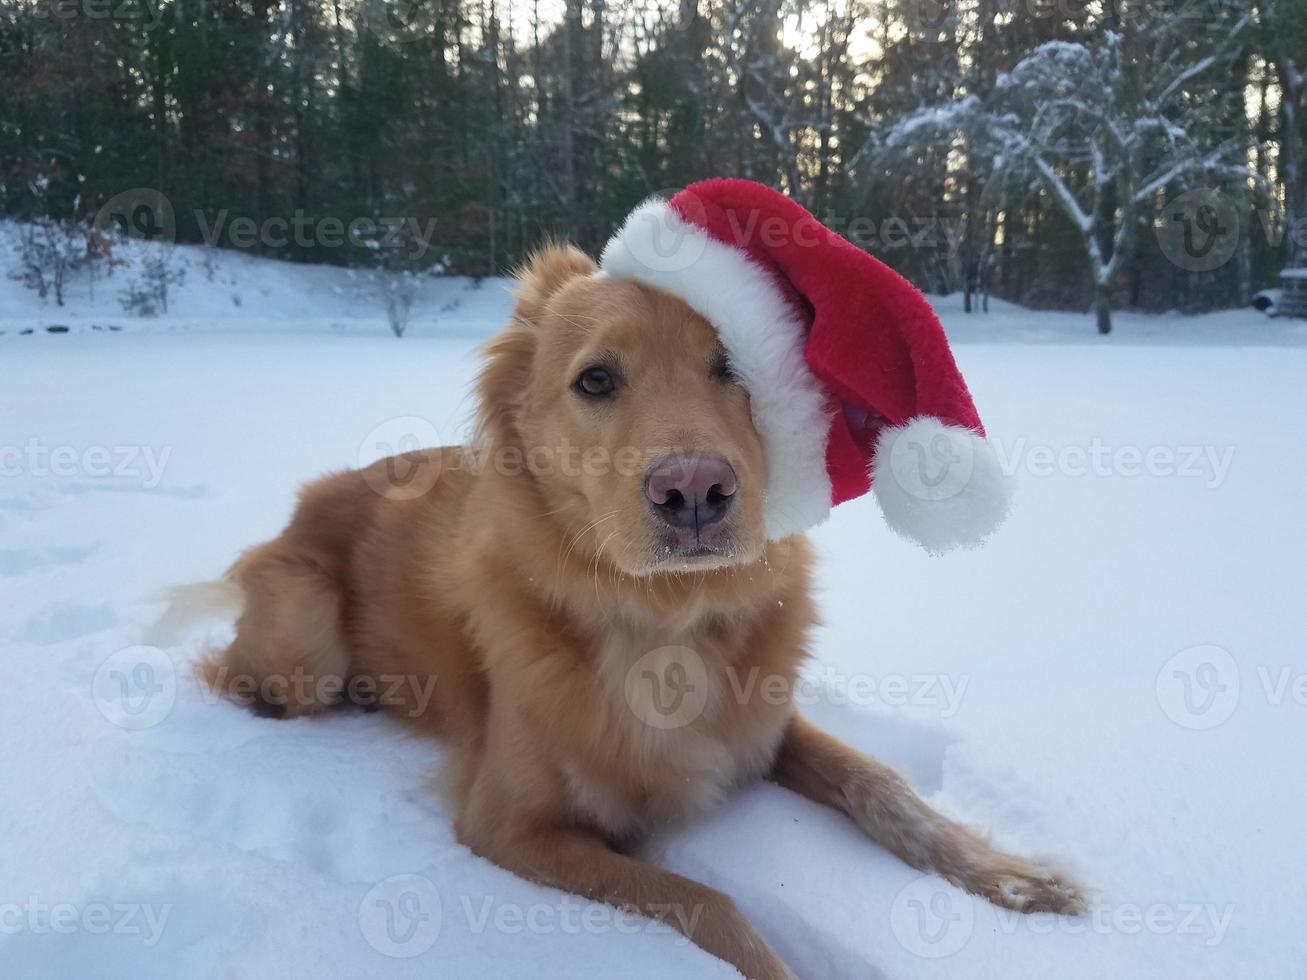 Very Cute Santa Dog with a Hat in the Snow photo